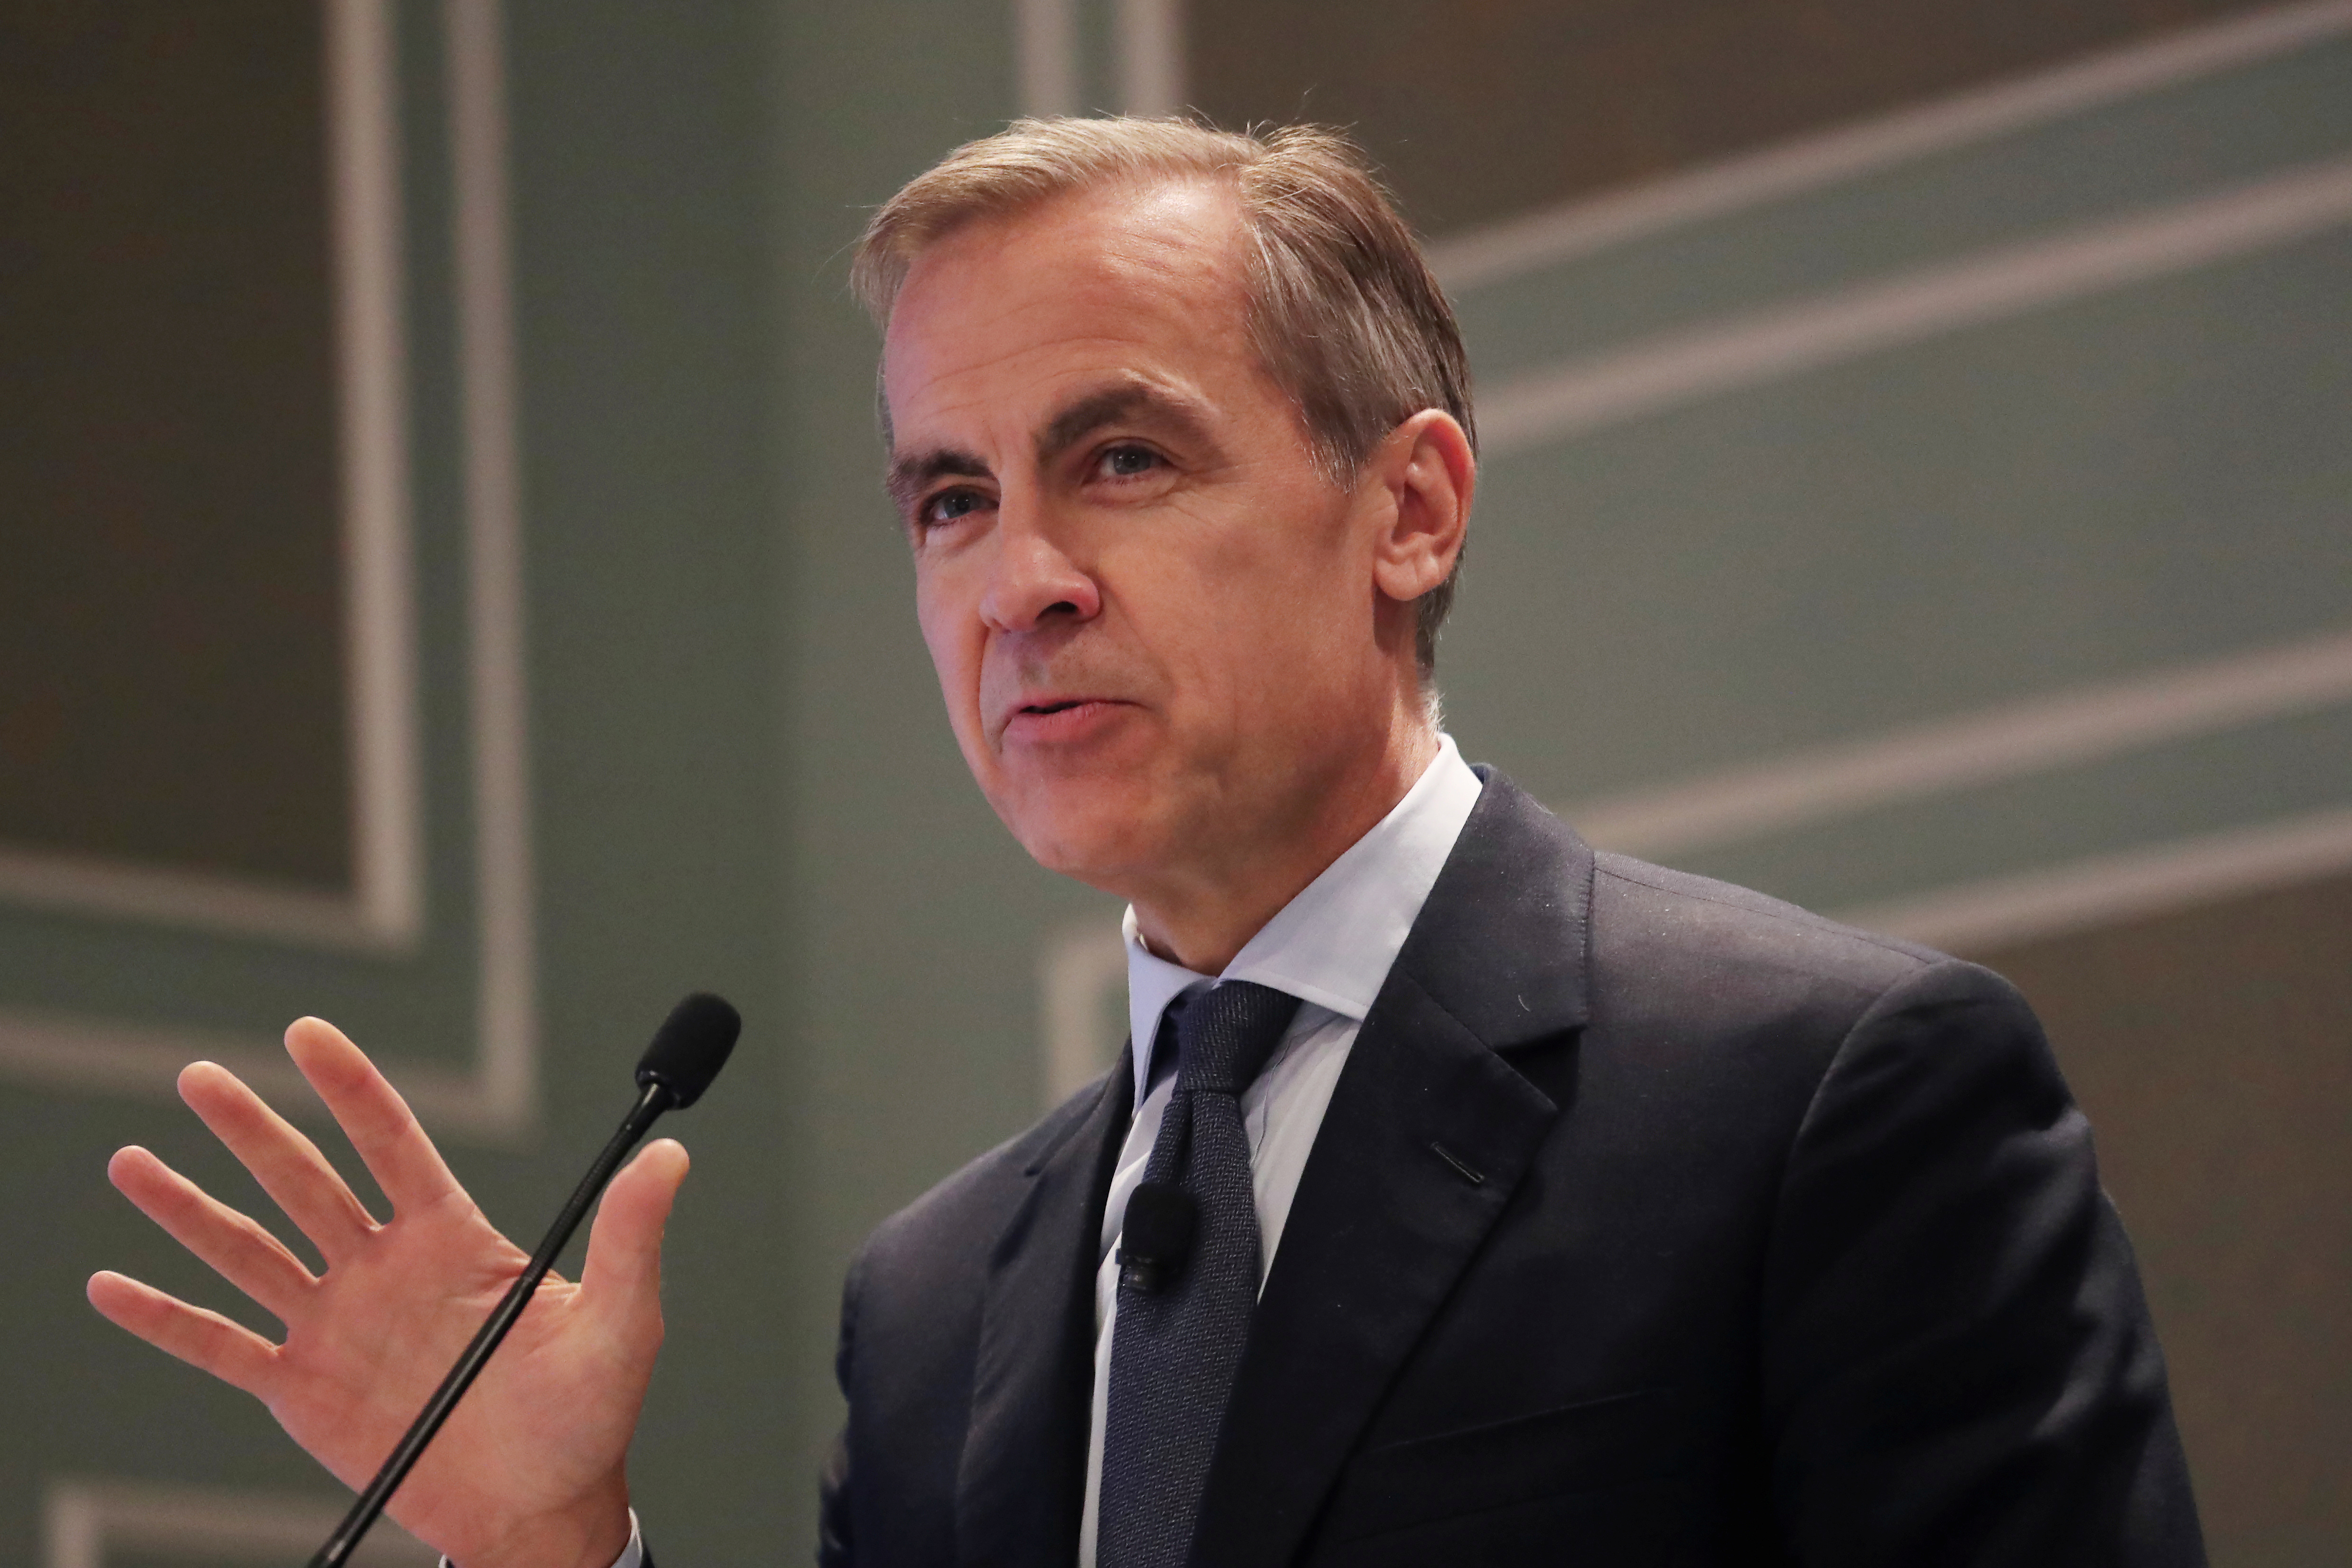 Mark Carney, the Governor of the Bank of England, speaks in New York